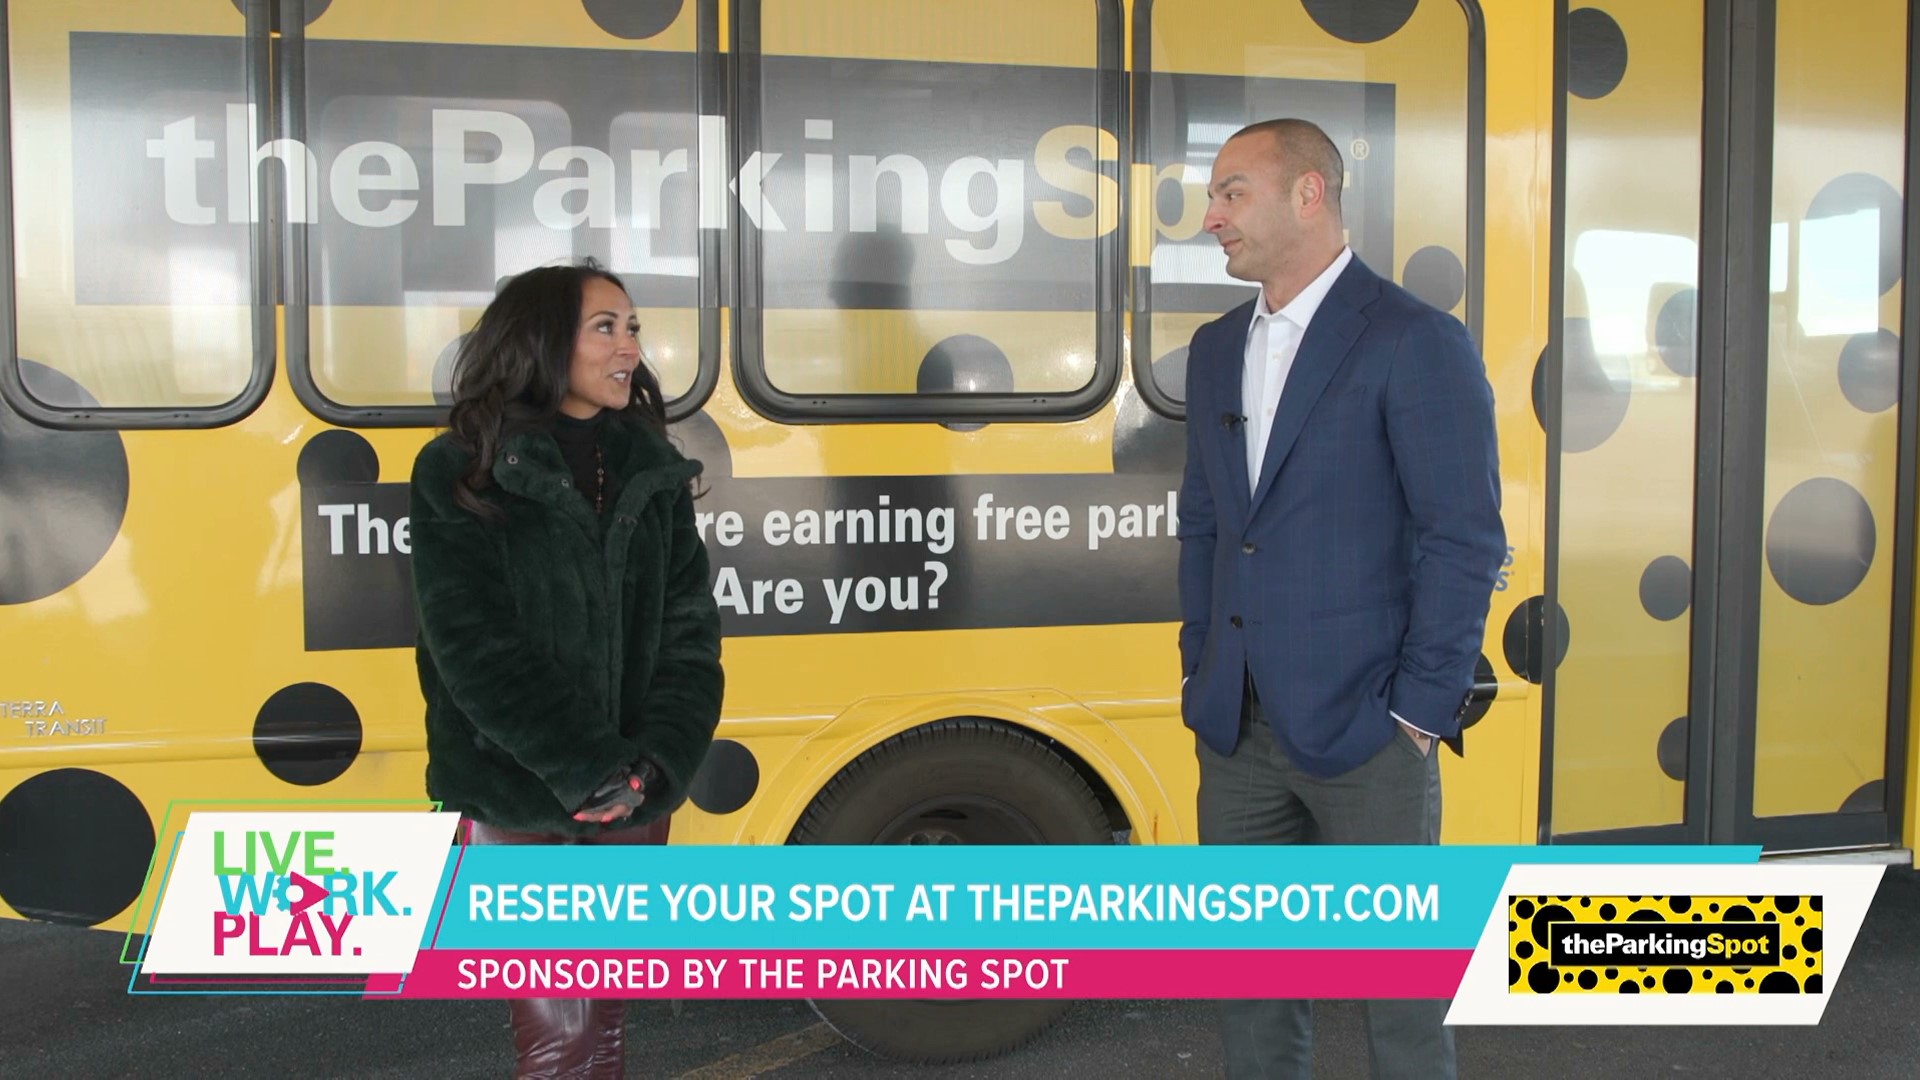 Travel tips from The Parking Spot on Live. Work. Play.